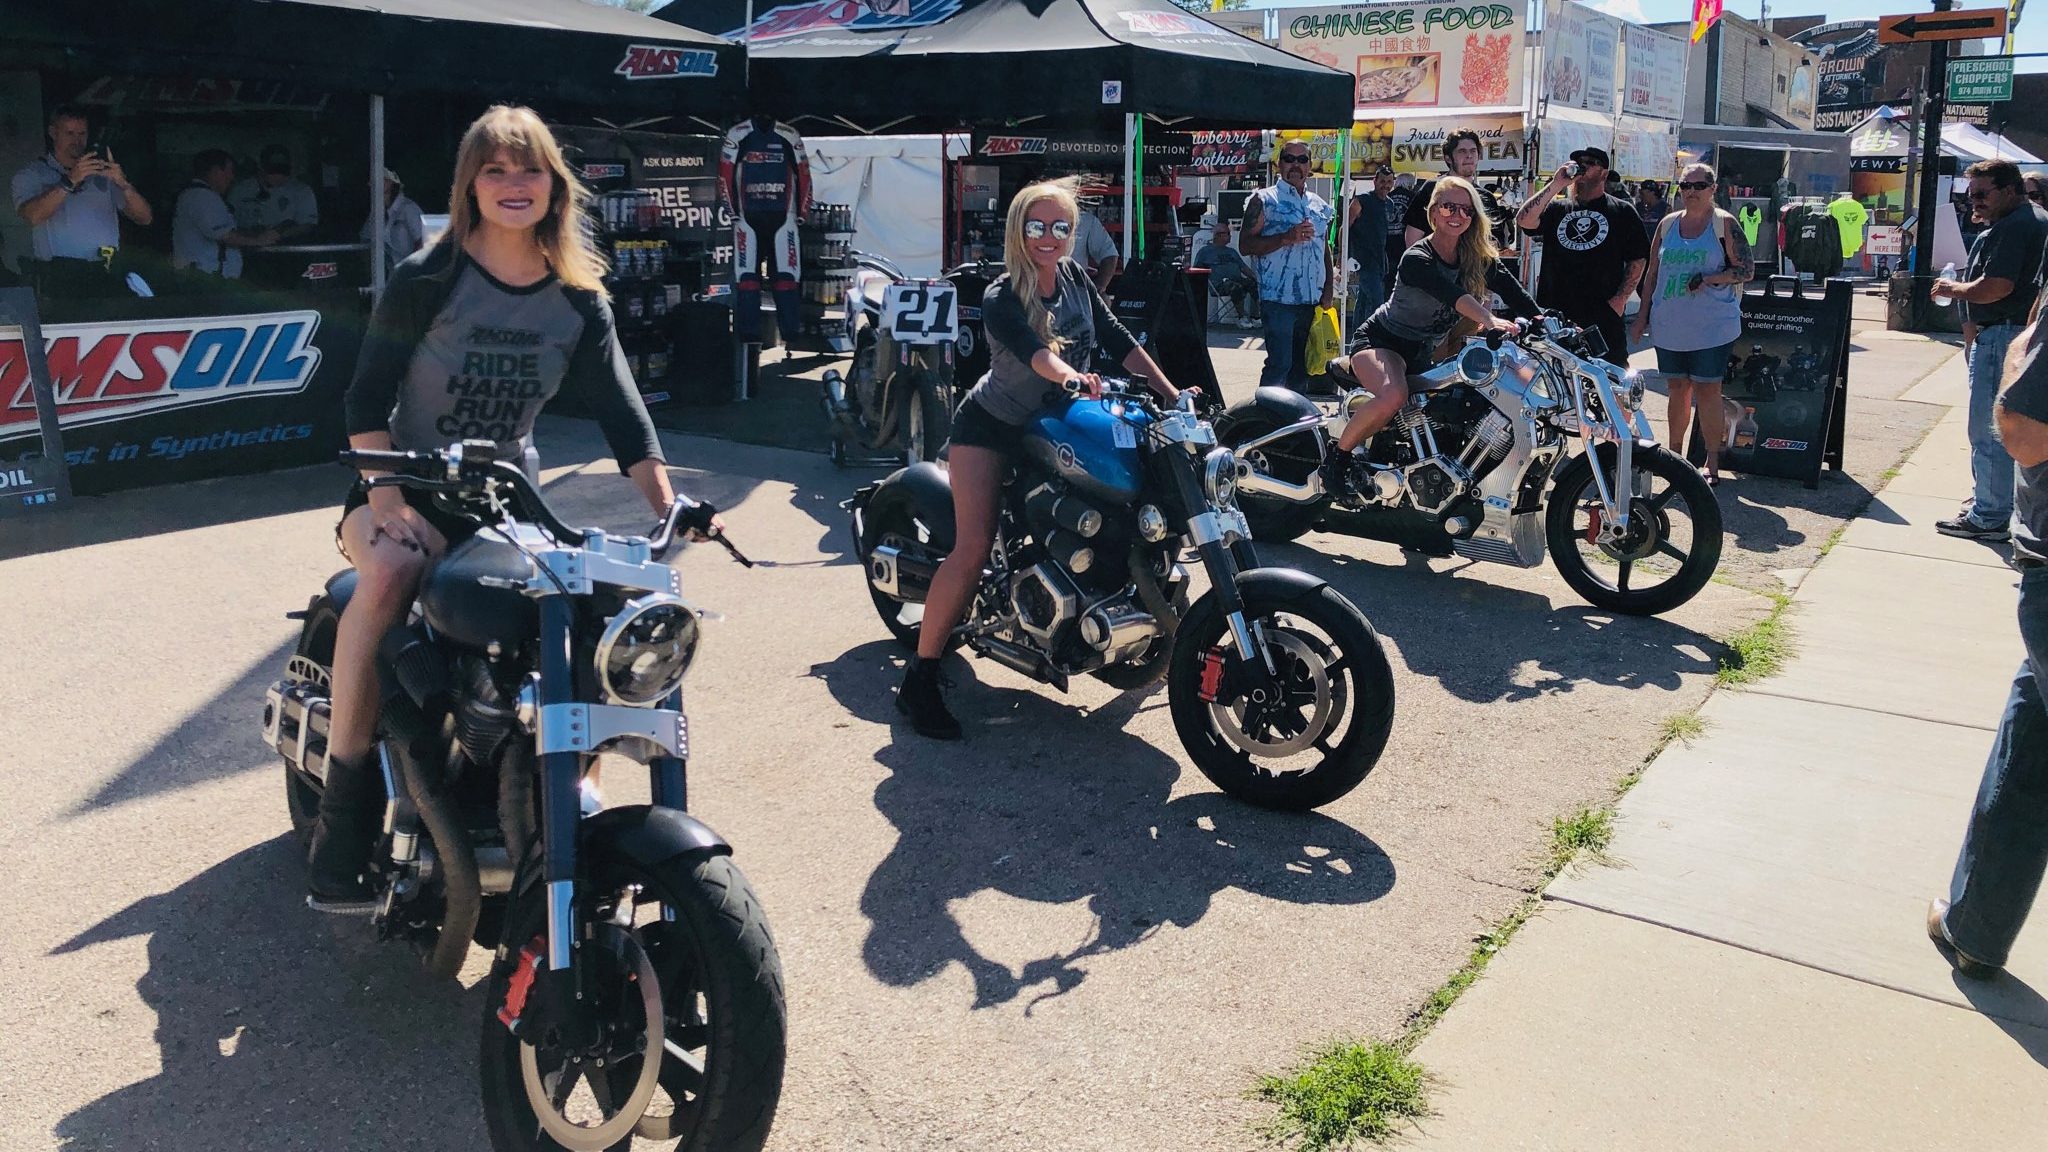 See Our Favorite Bikes from the 2019 Sturgis Motorcycle Rally